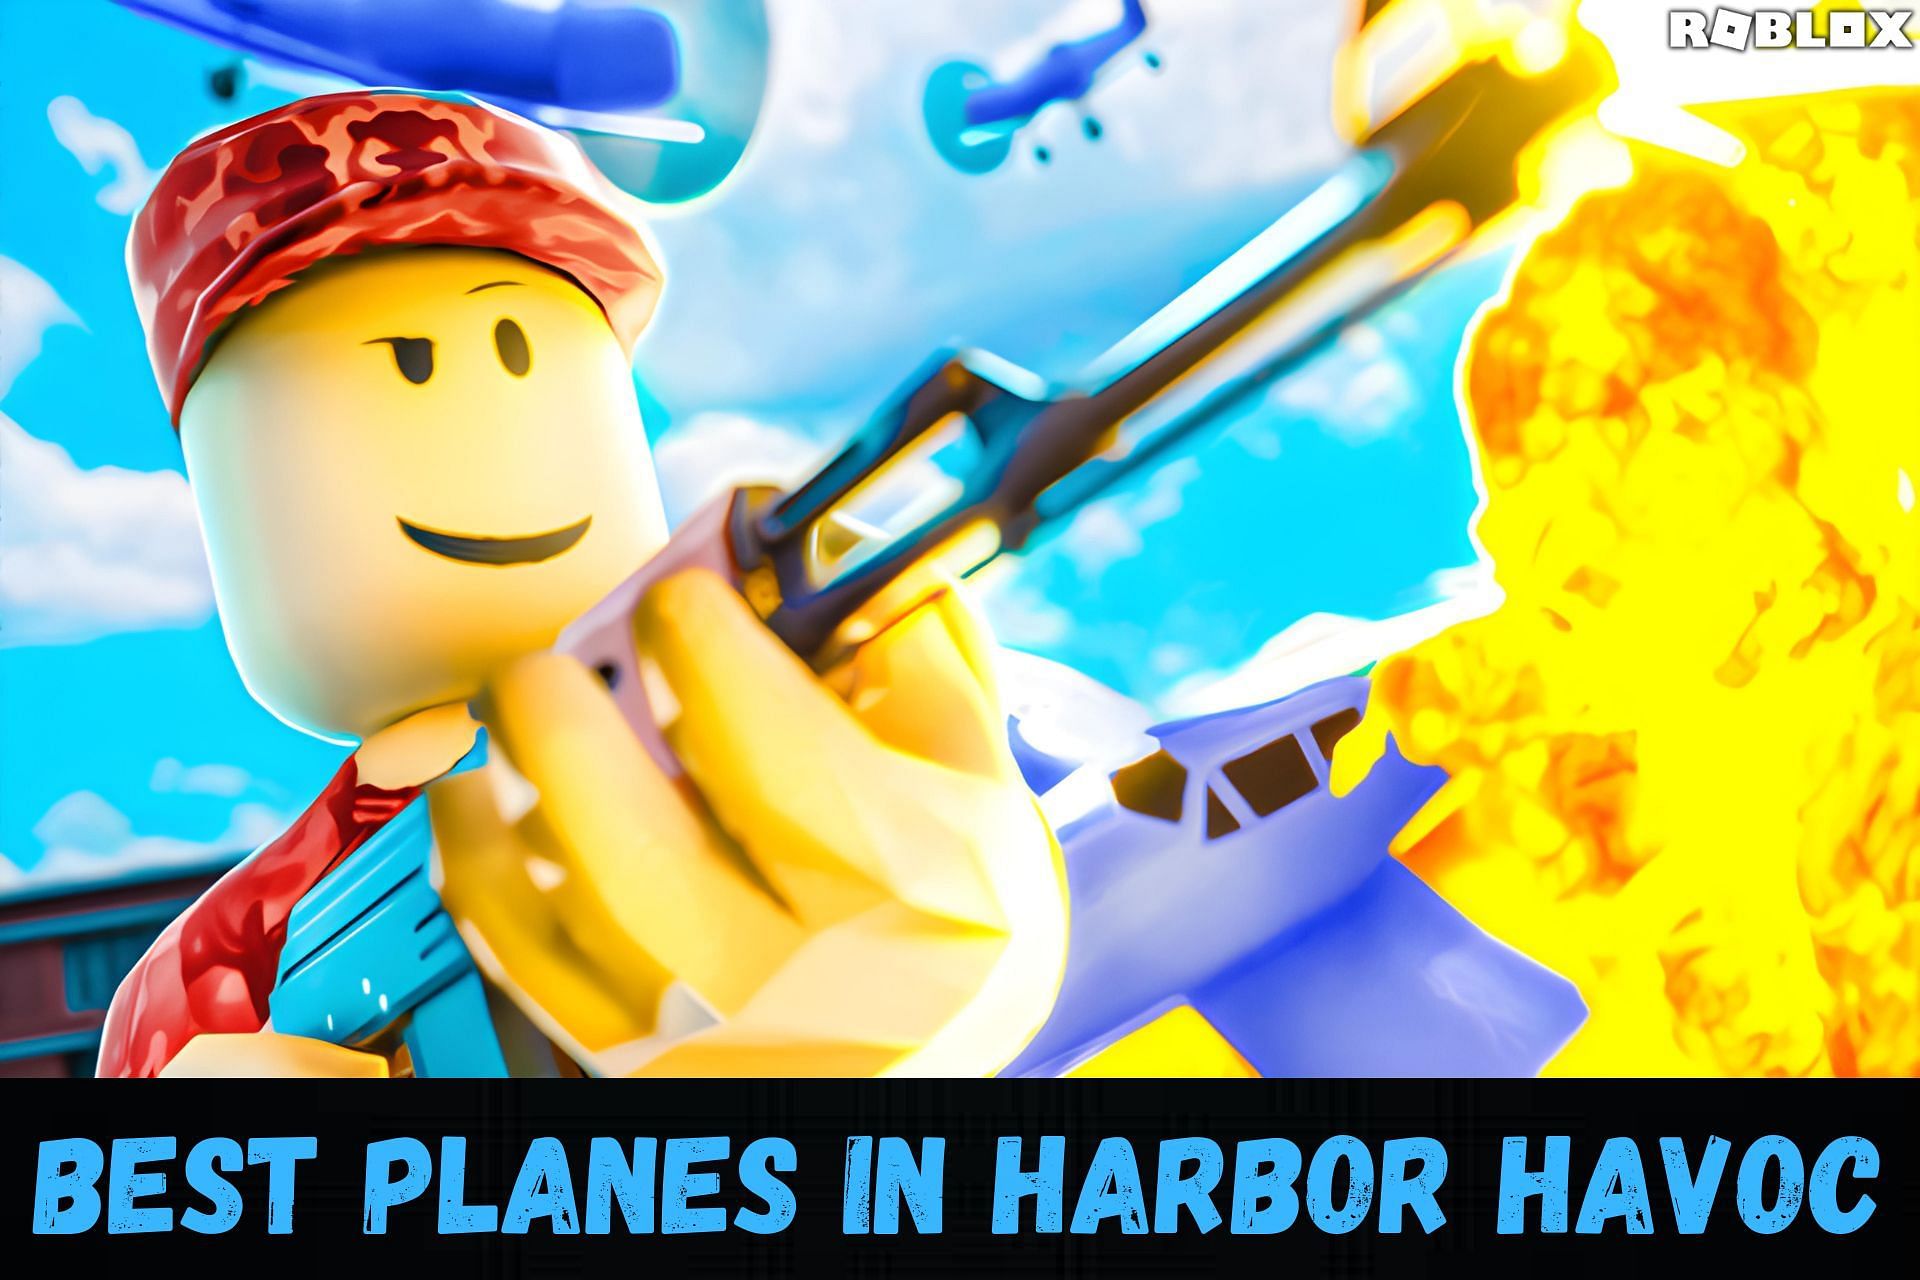 Fly the best planes (Image via Roblox)